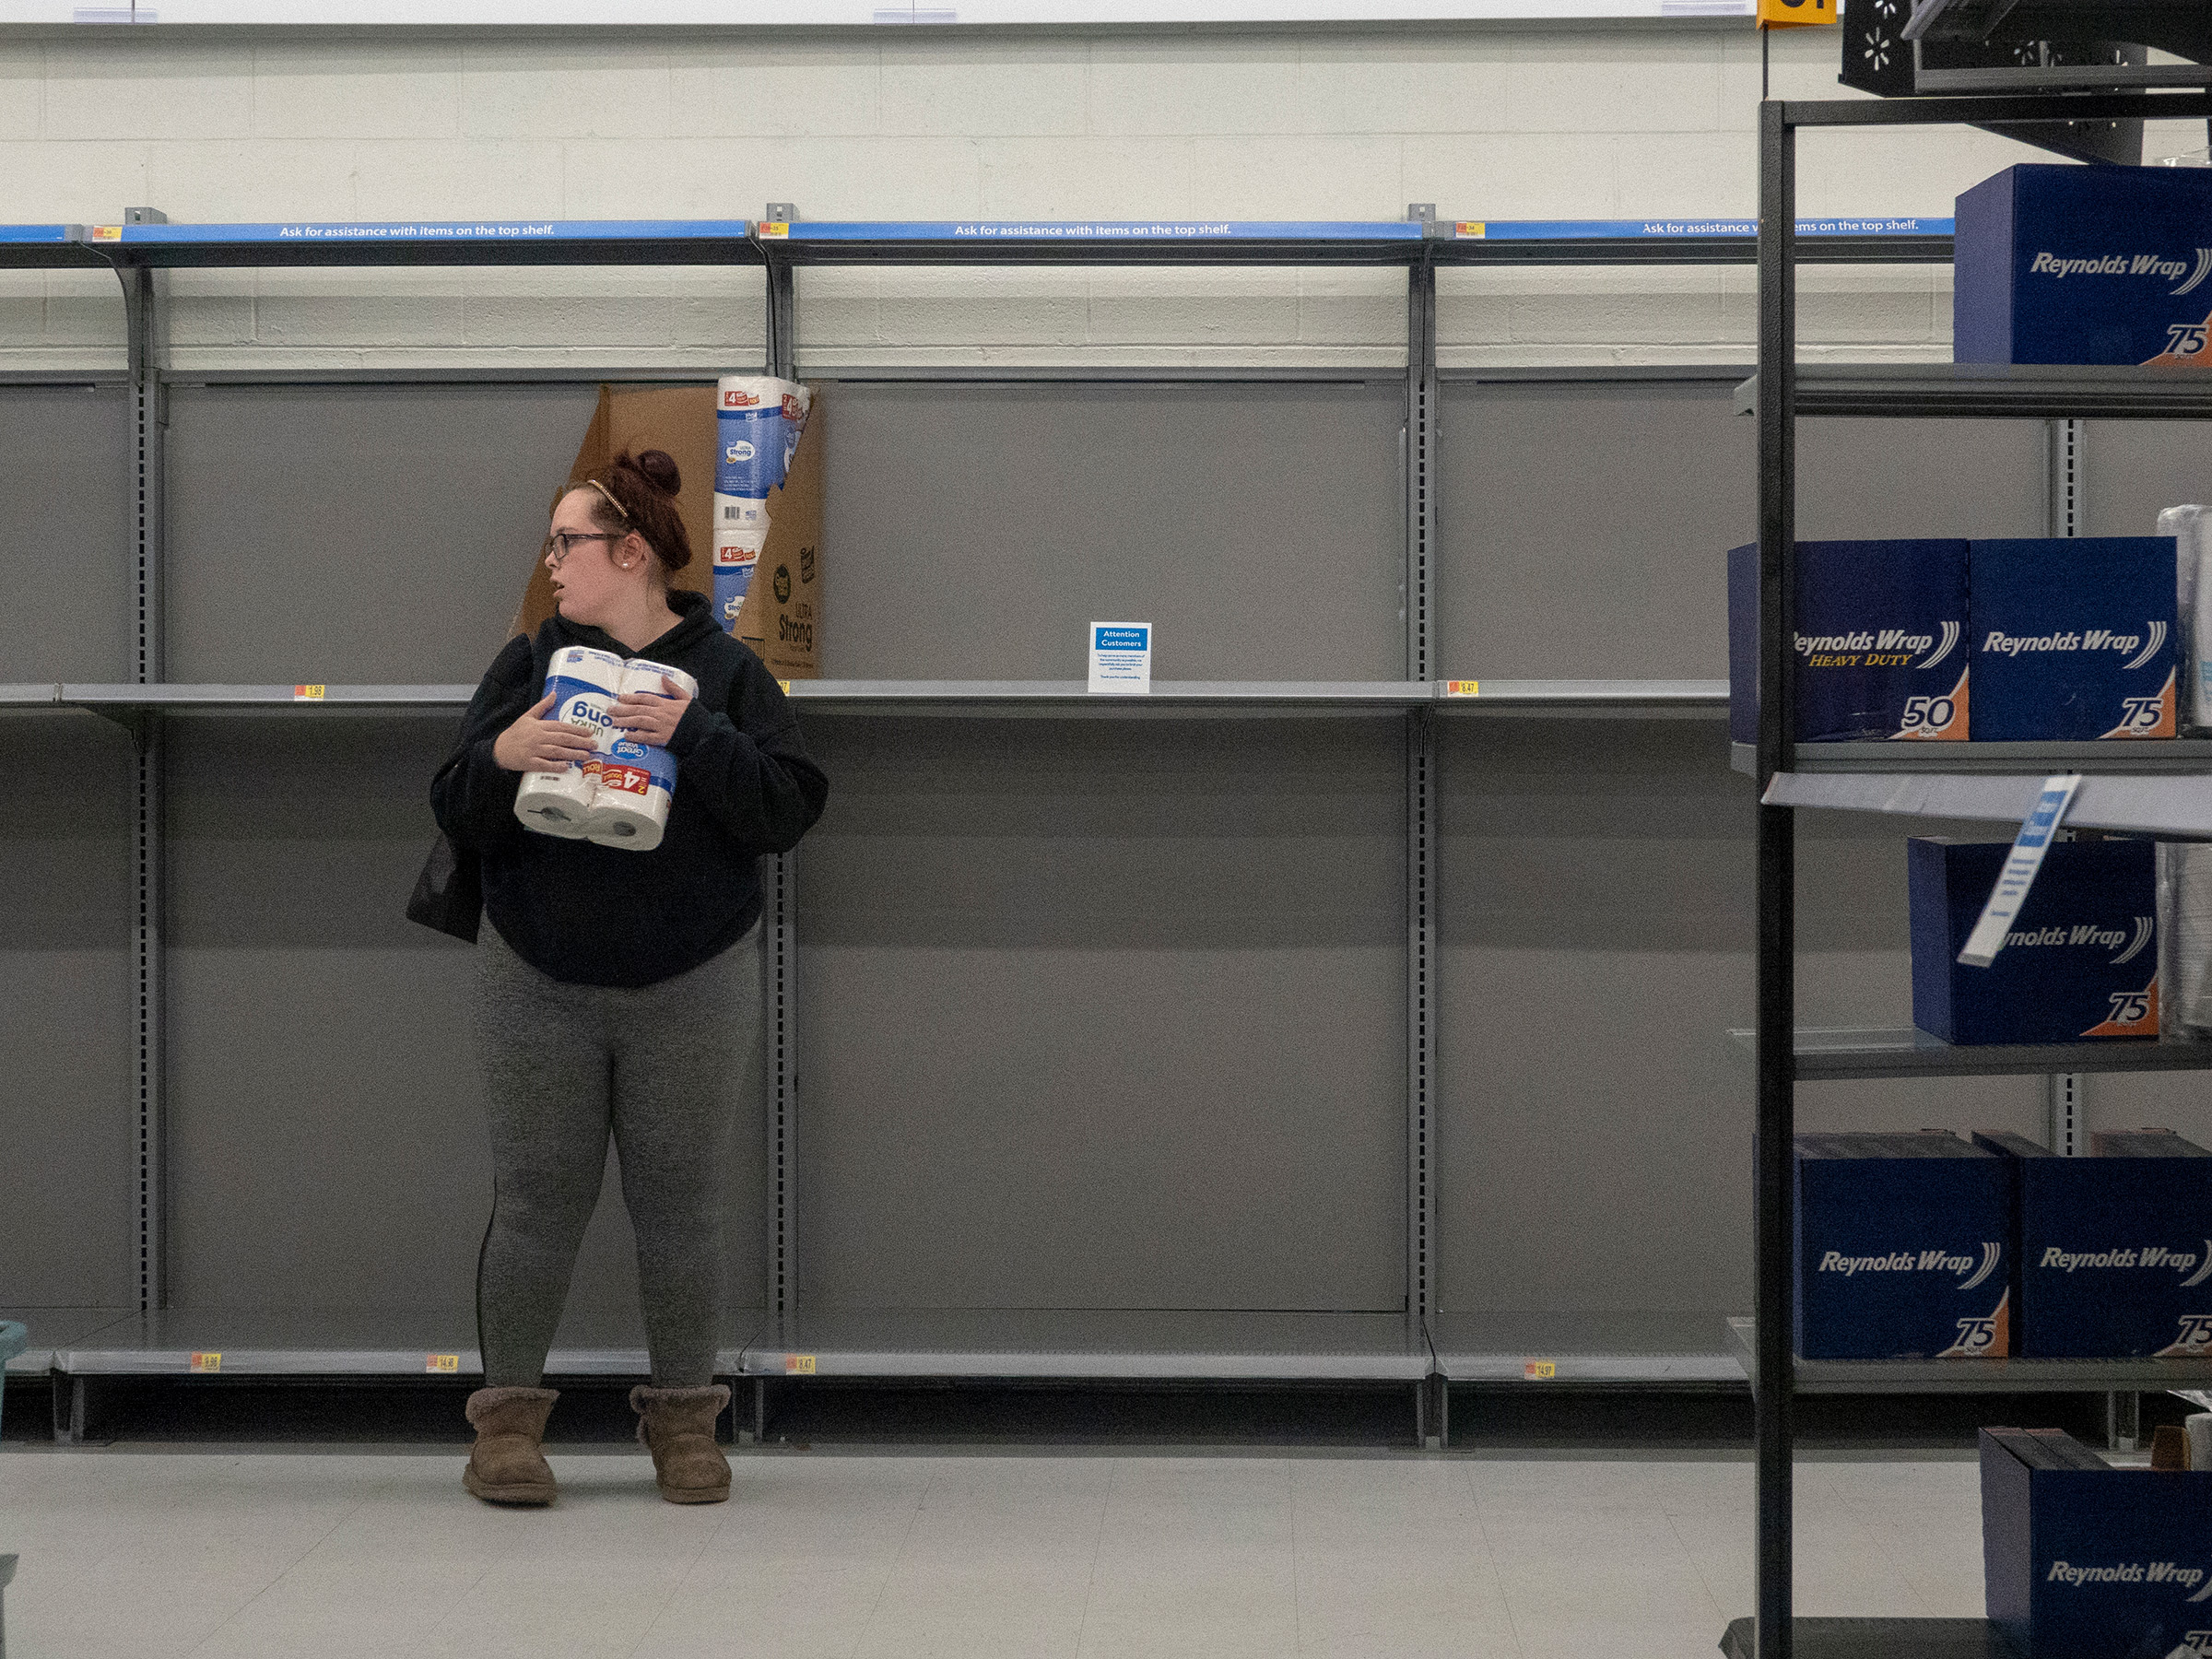 <strong>Easton, Md., March 28, 2020.</strong> A nearly empty toilet paper and paper towel aisle during the coronavirus lockdown. (Peter van Agtmael—Magnum Photos for TIME)